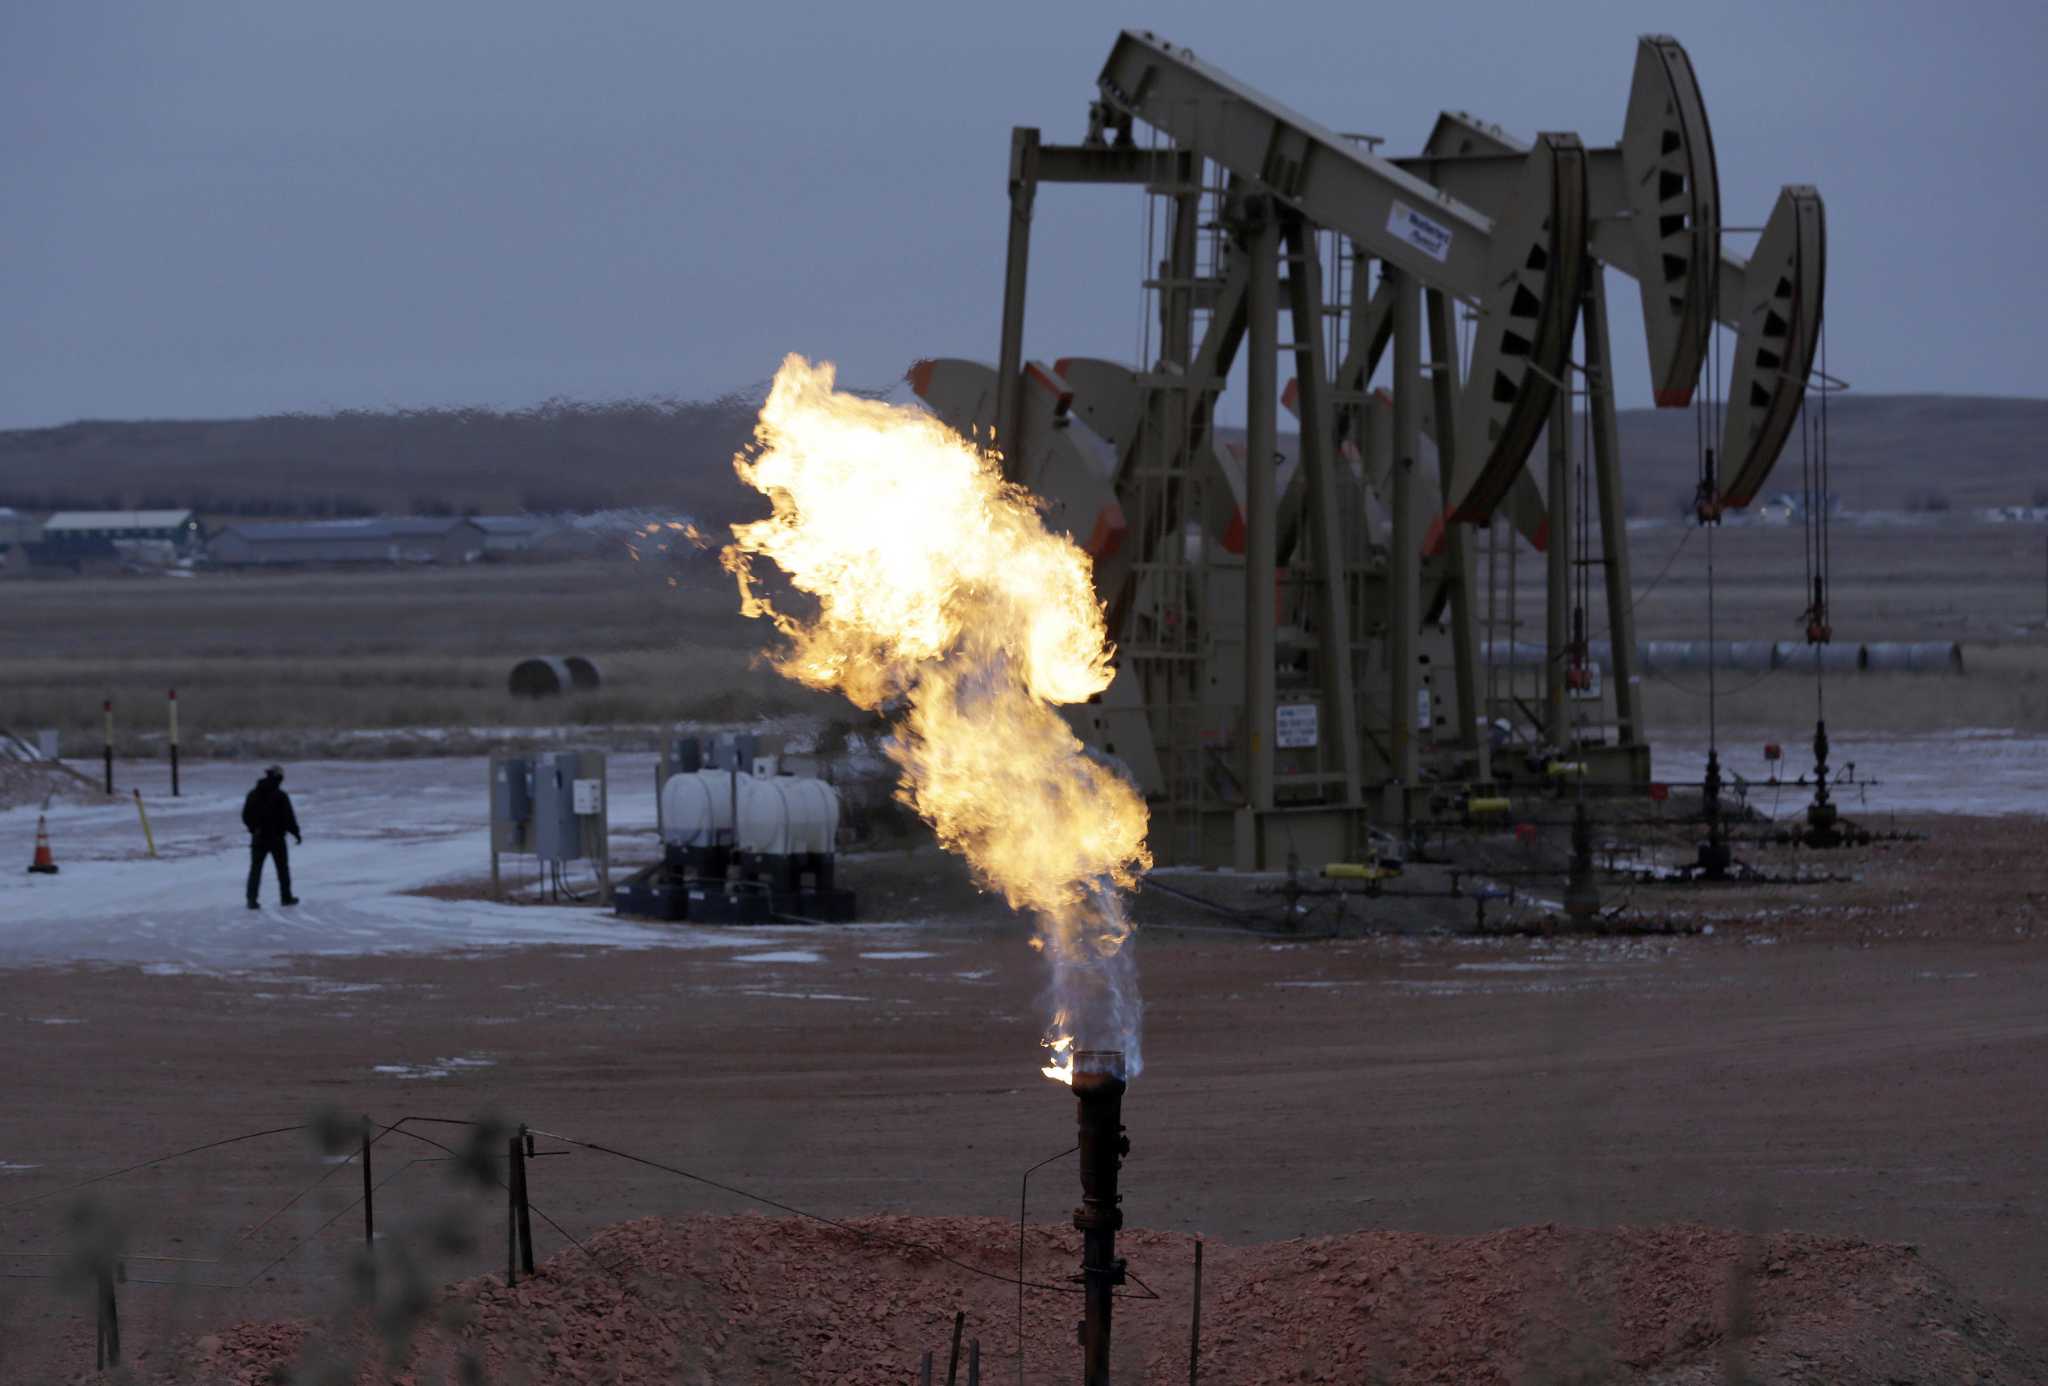 Natural gas companies call for carbon tax